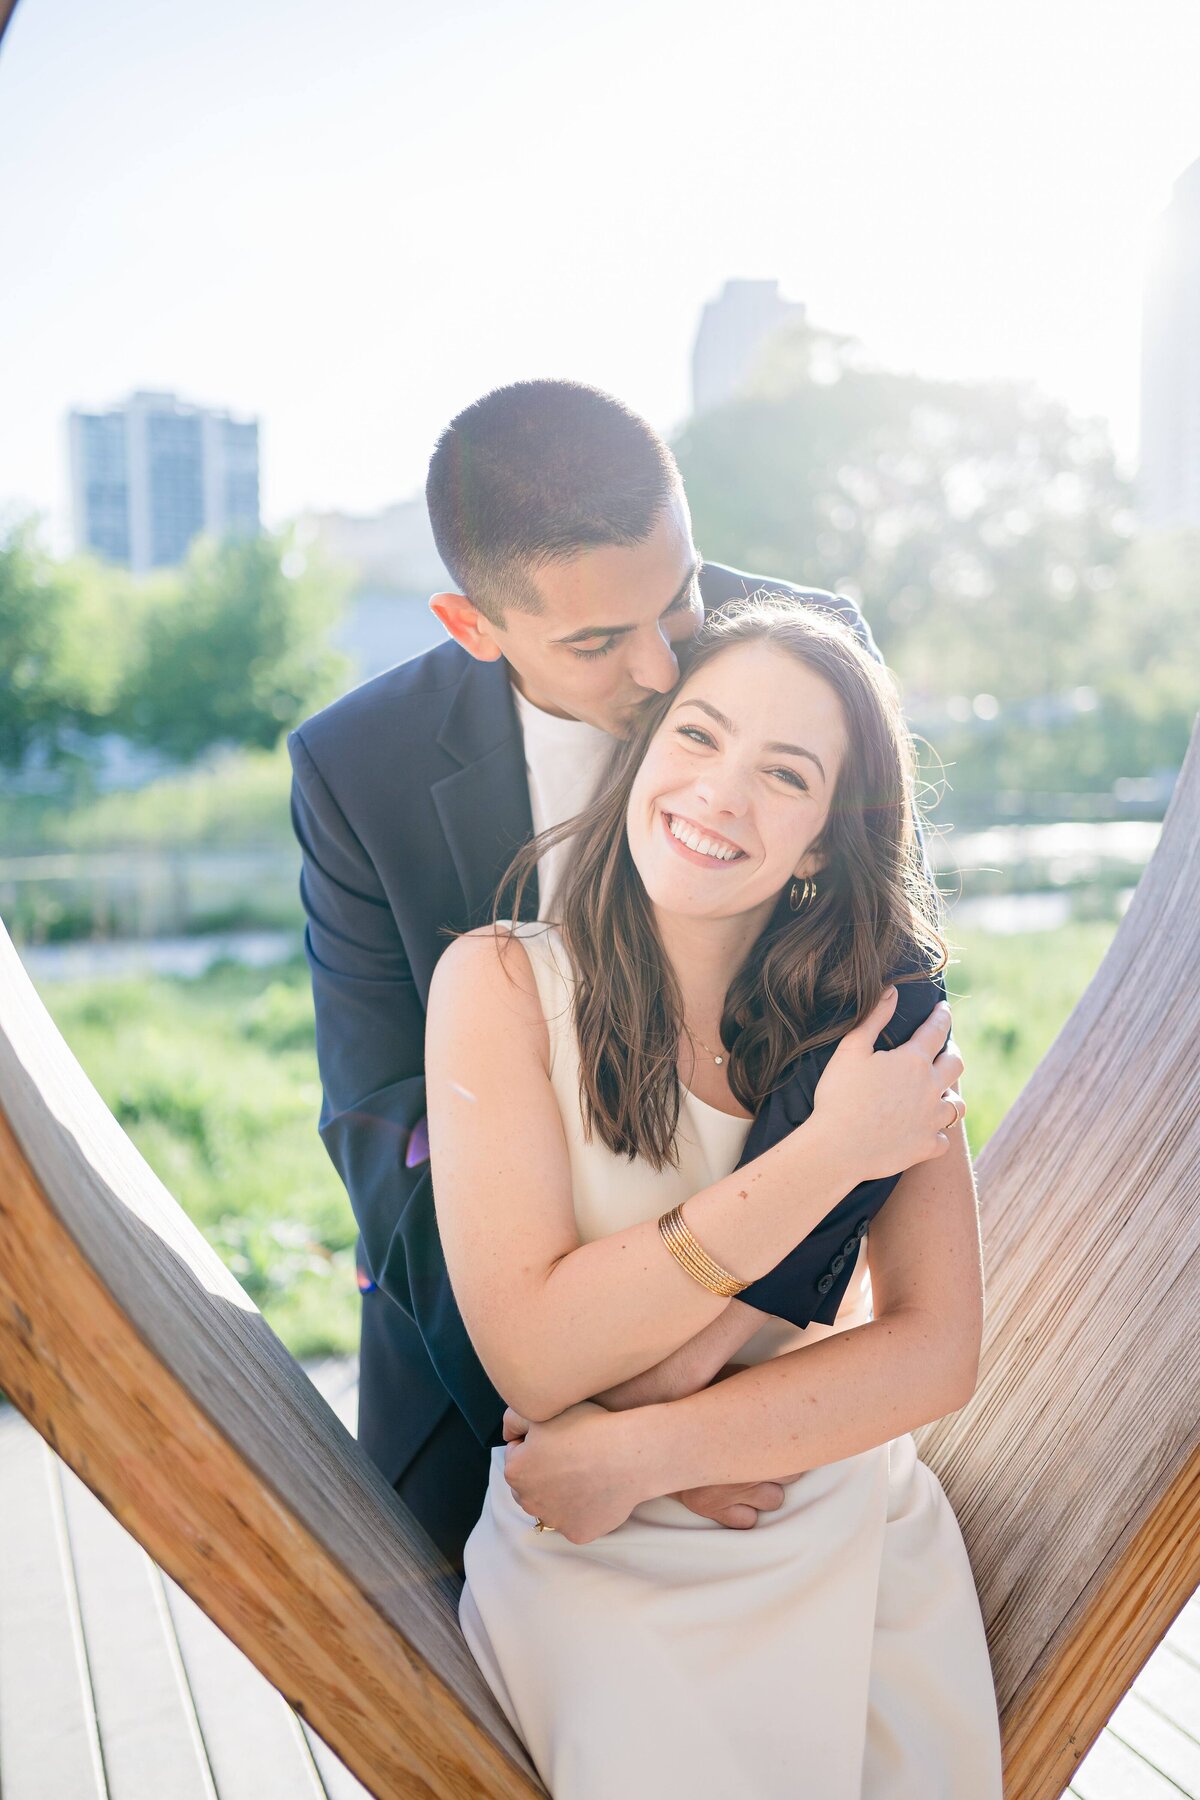 Katie-Whitcomb-Photography-chicago-engagement-session-Marie-Barret-008